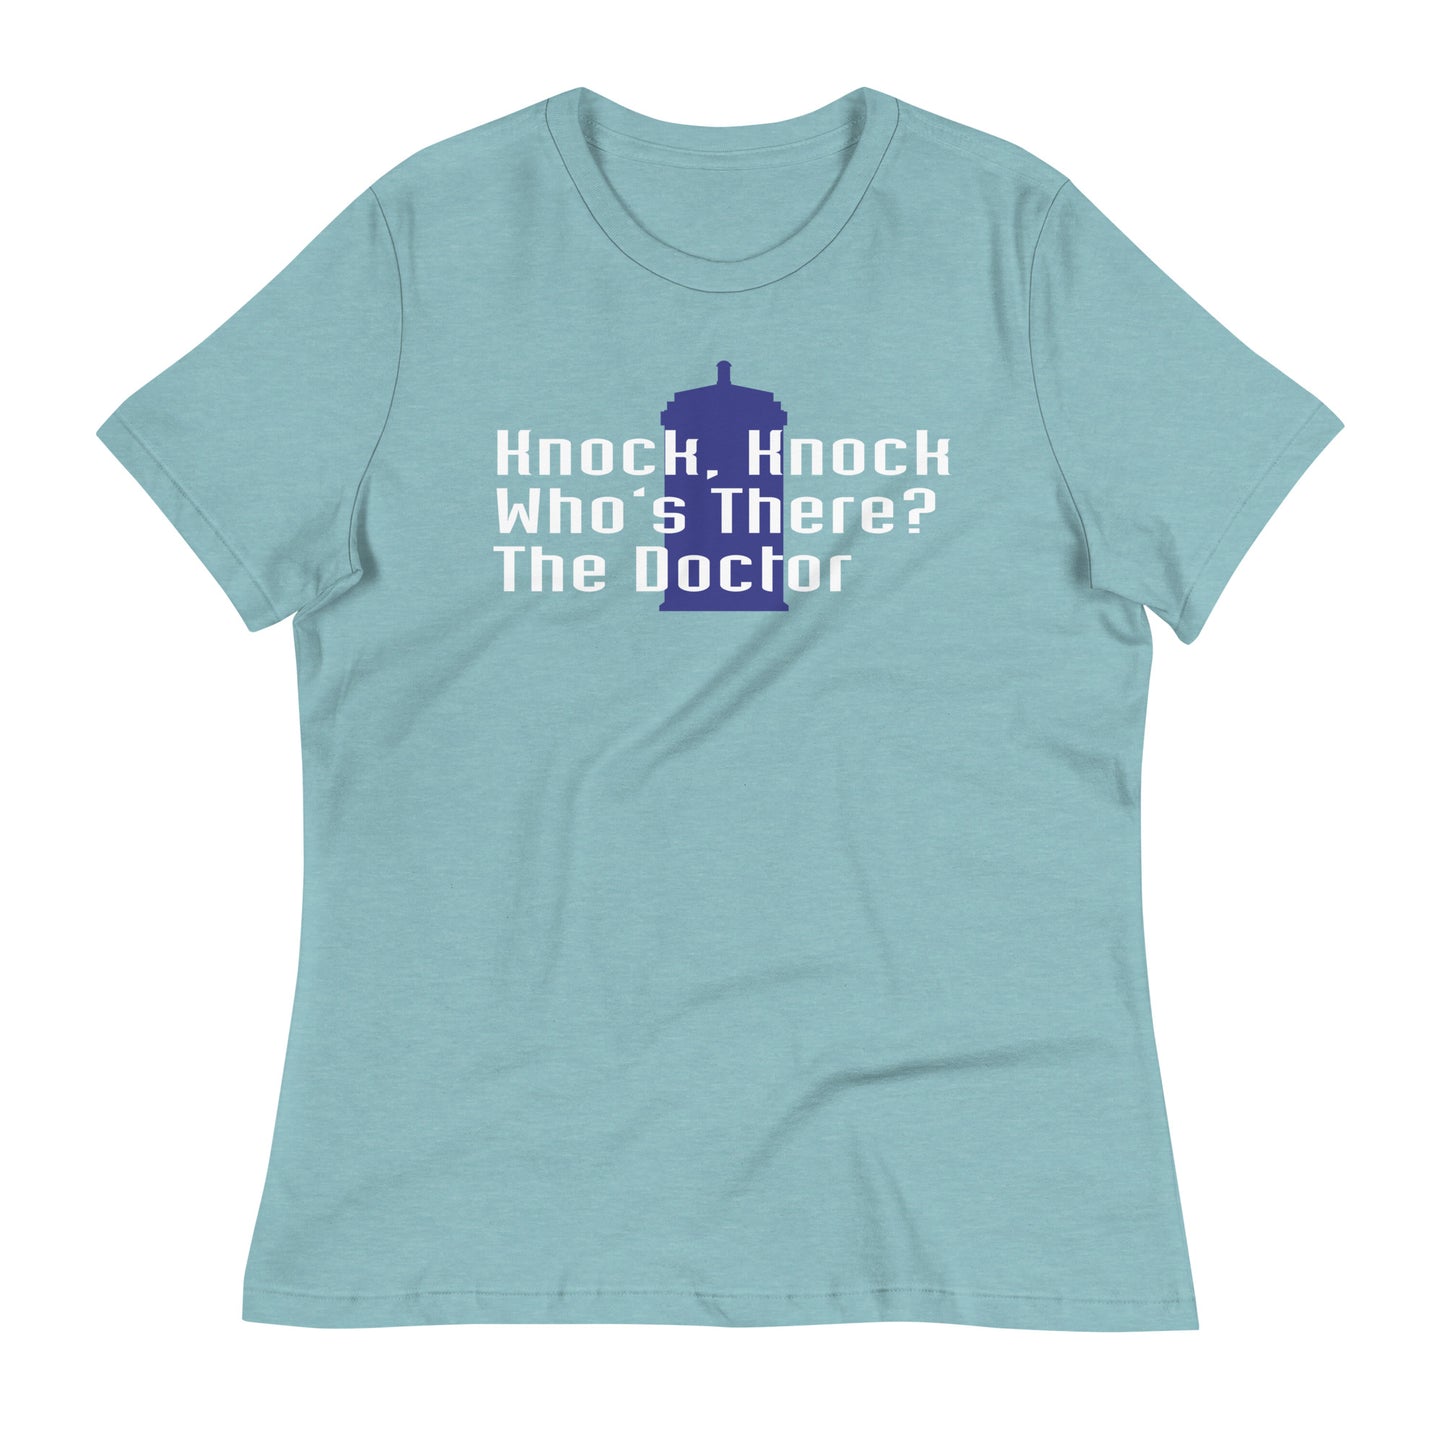 Knock Knock! Who's There? The Doctor Women's Signature Tee